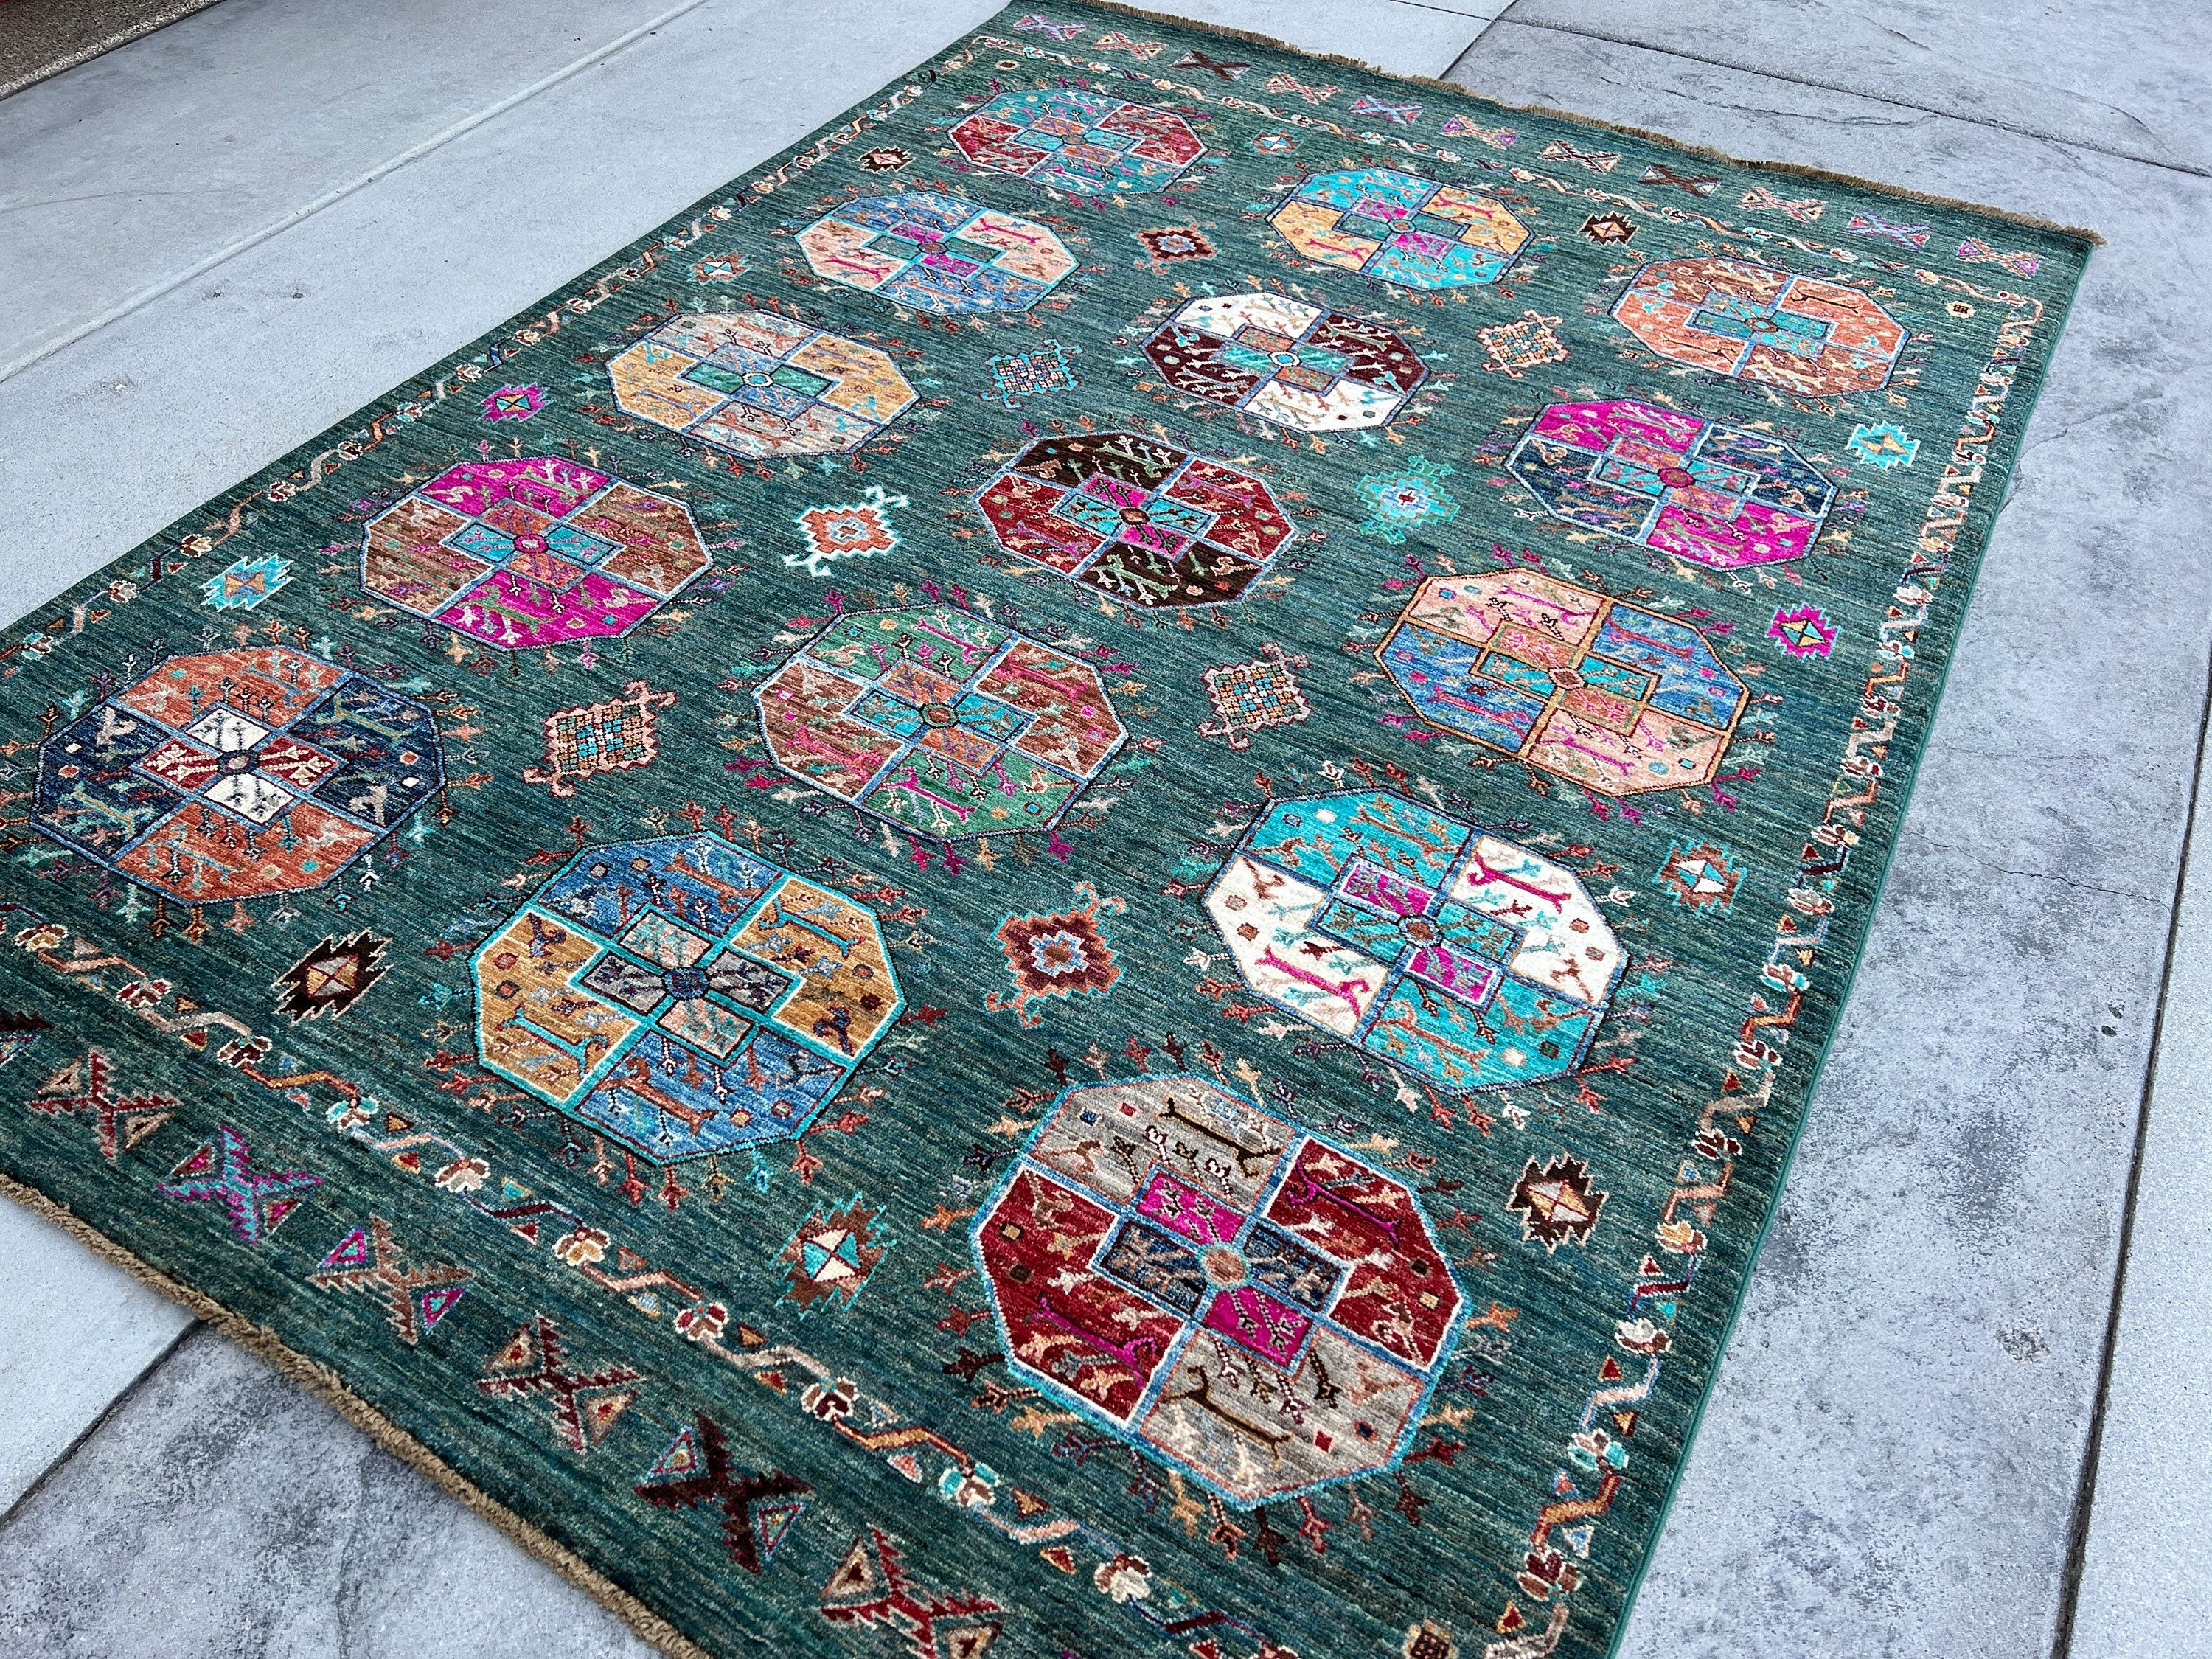 Contemporary 5x7 Hand-Knotted Afghan Rug Premium Hand-Spun Afghan Wool Fair Trade For Sale